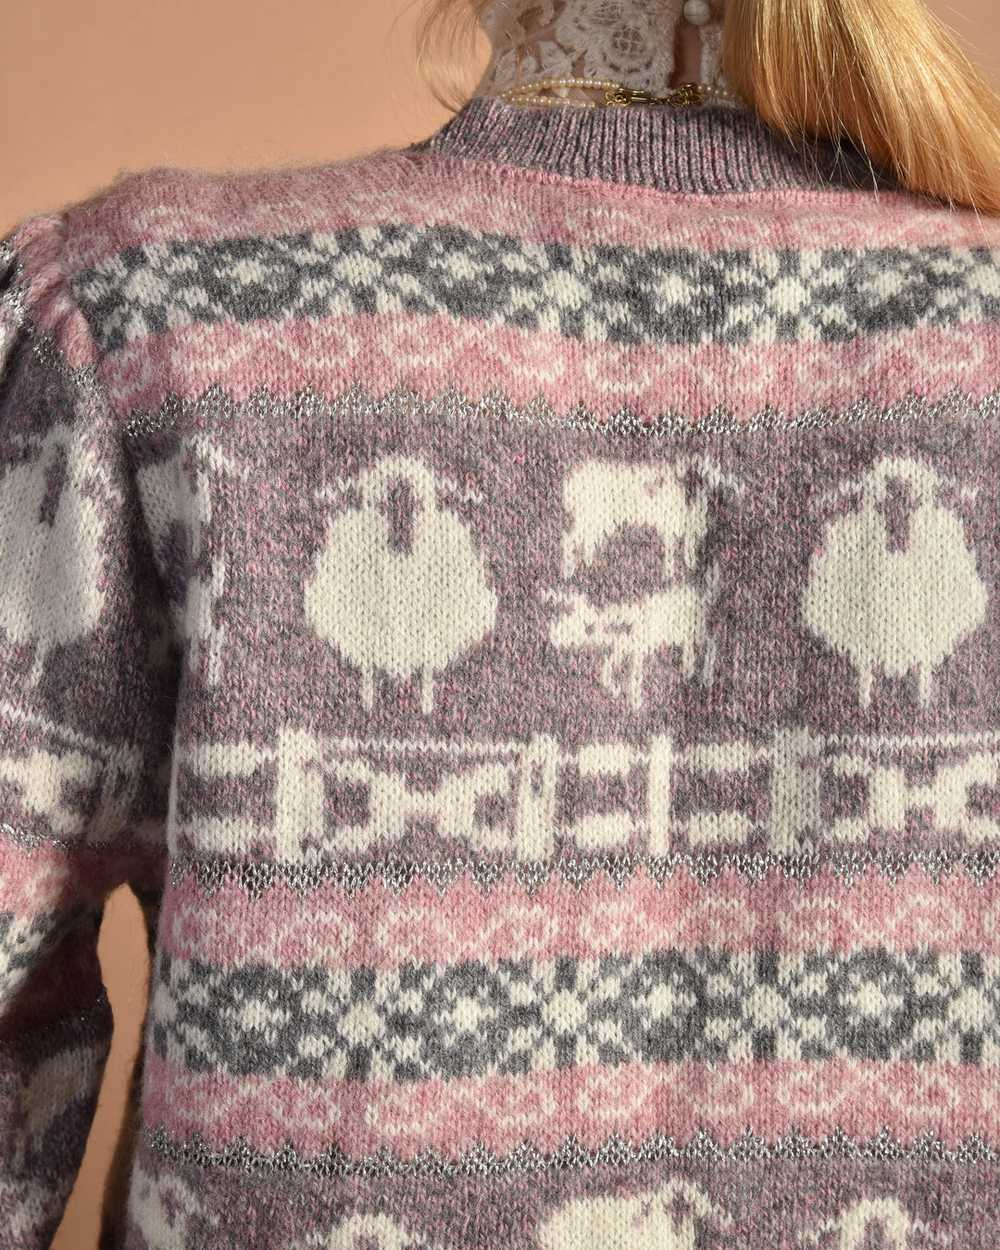 Dorian 1980s Sparkly Wool Sheep Sweater - image 2